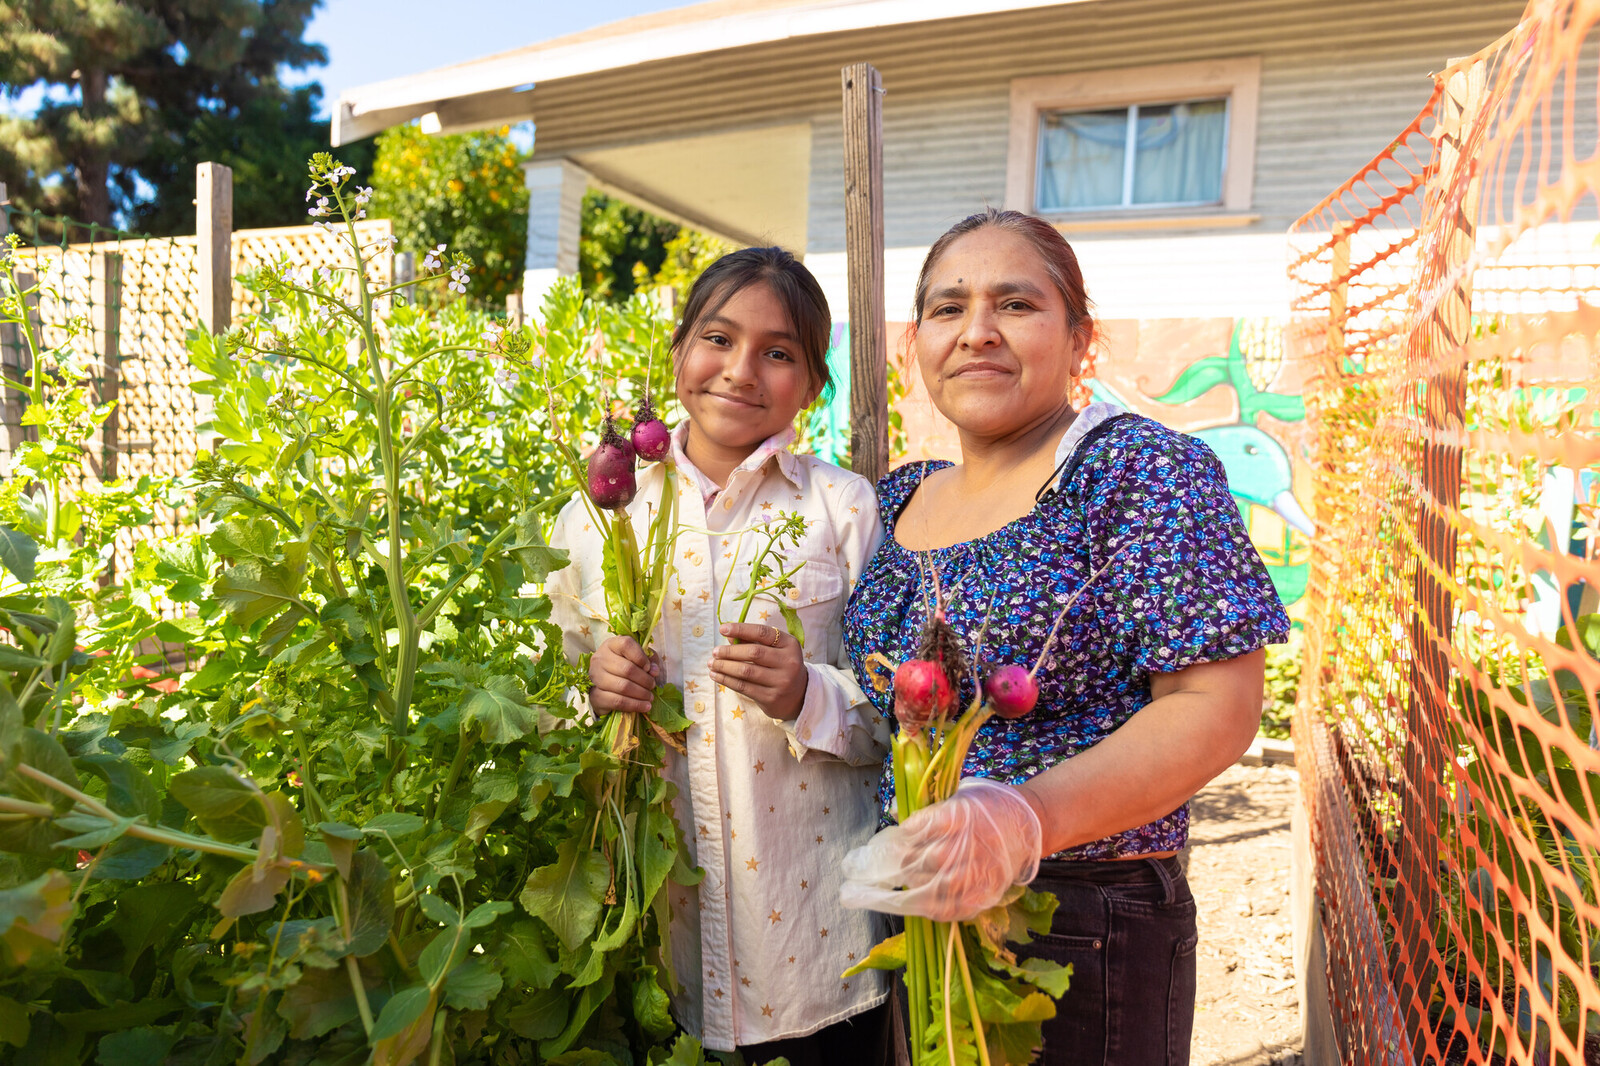 Two people hold recently picked beets in a community garden